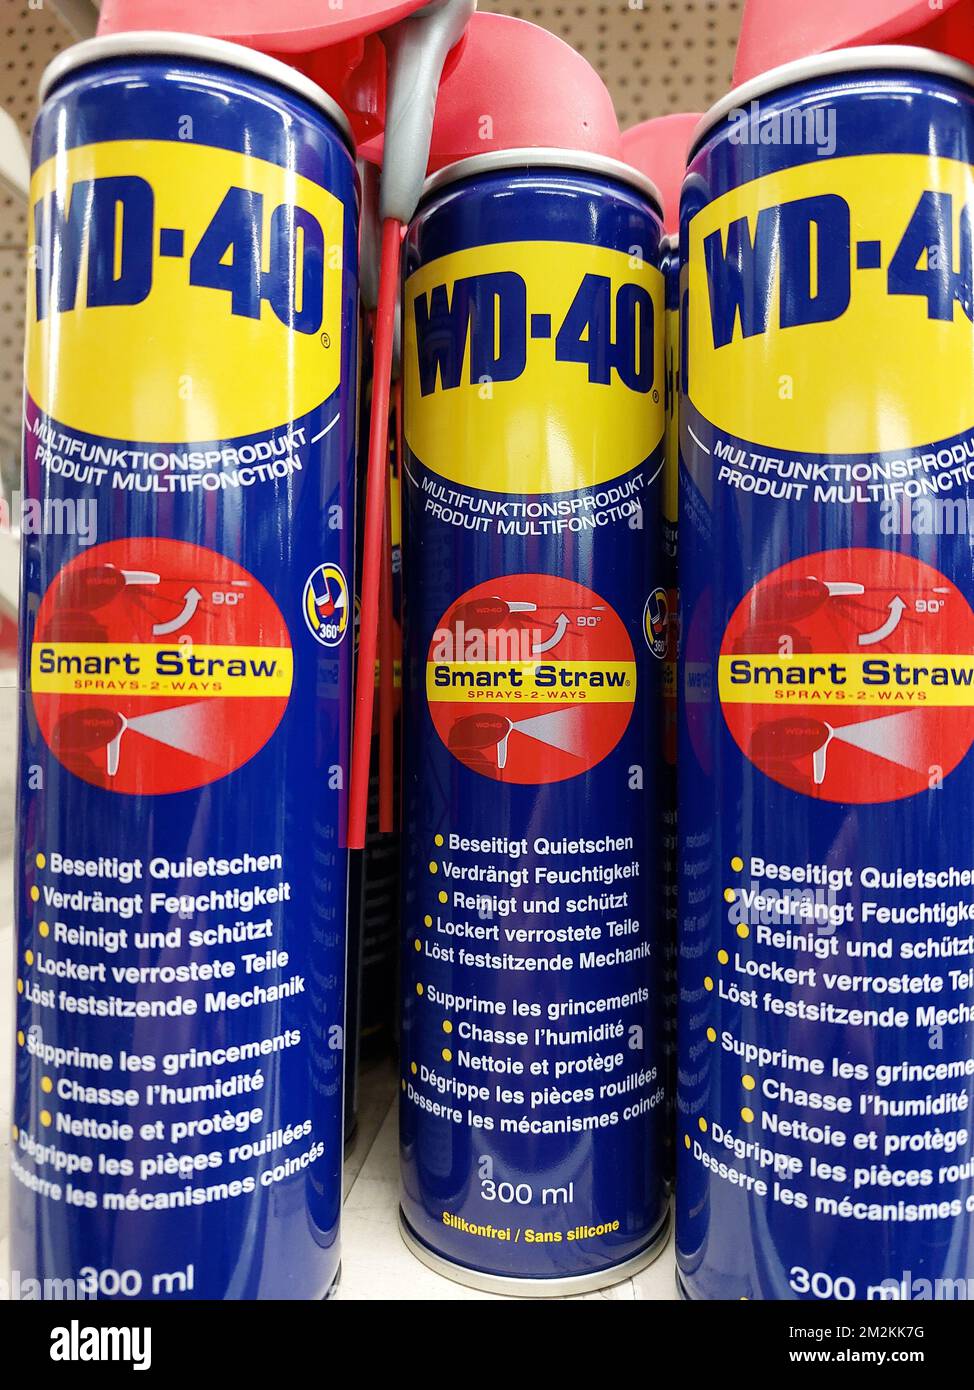 WD-40 Huile multifonction Smart Straw 100 ml